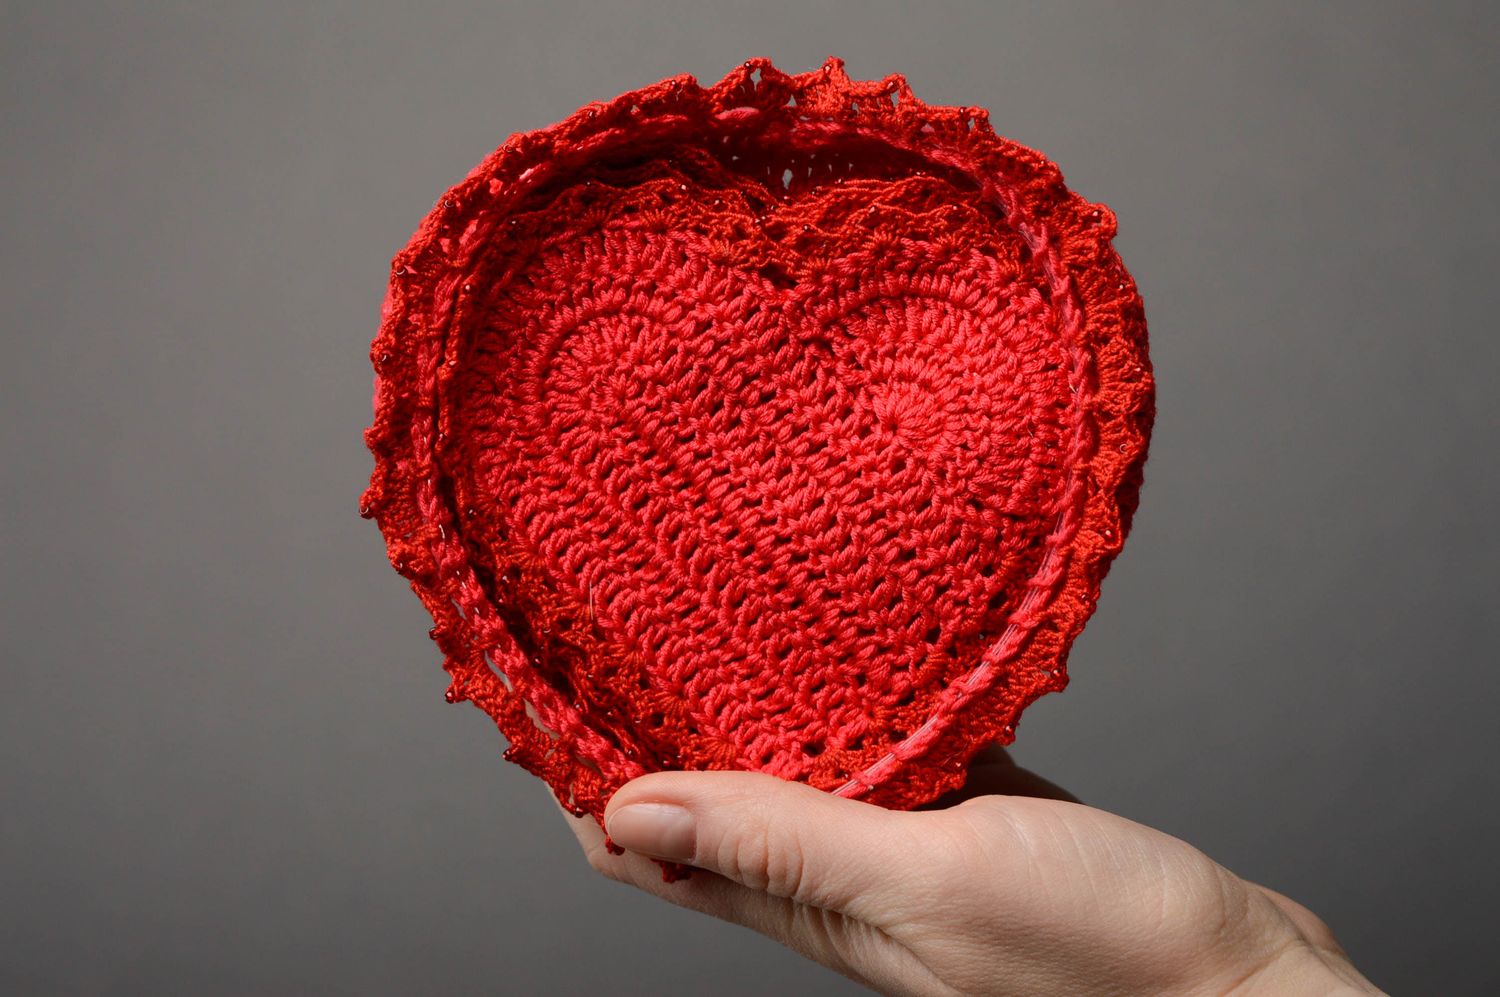 Heart shaped crochet candy bowl and coasters photo 4